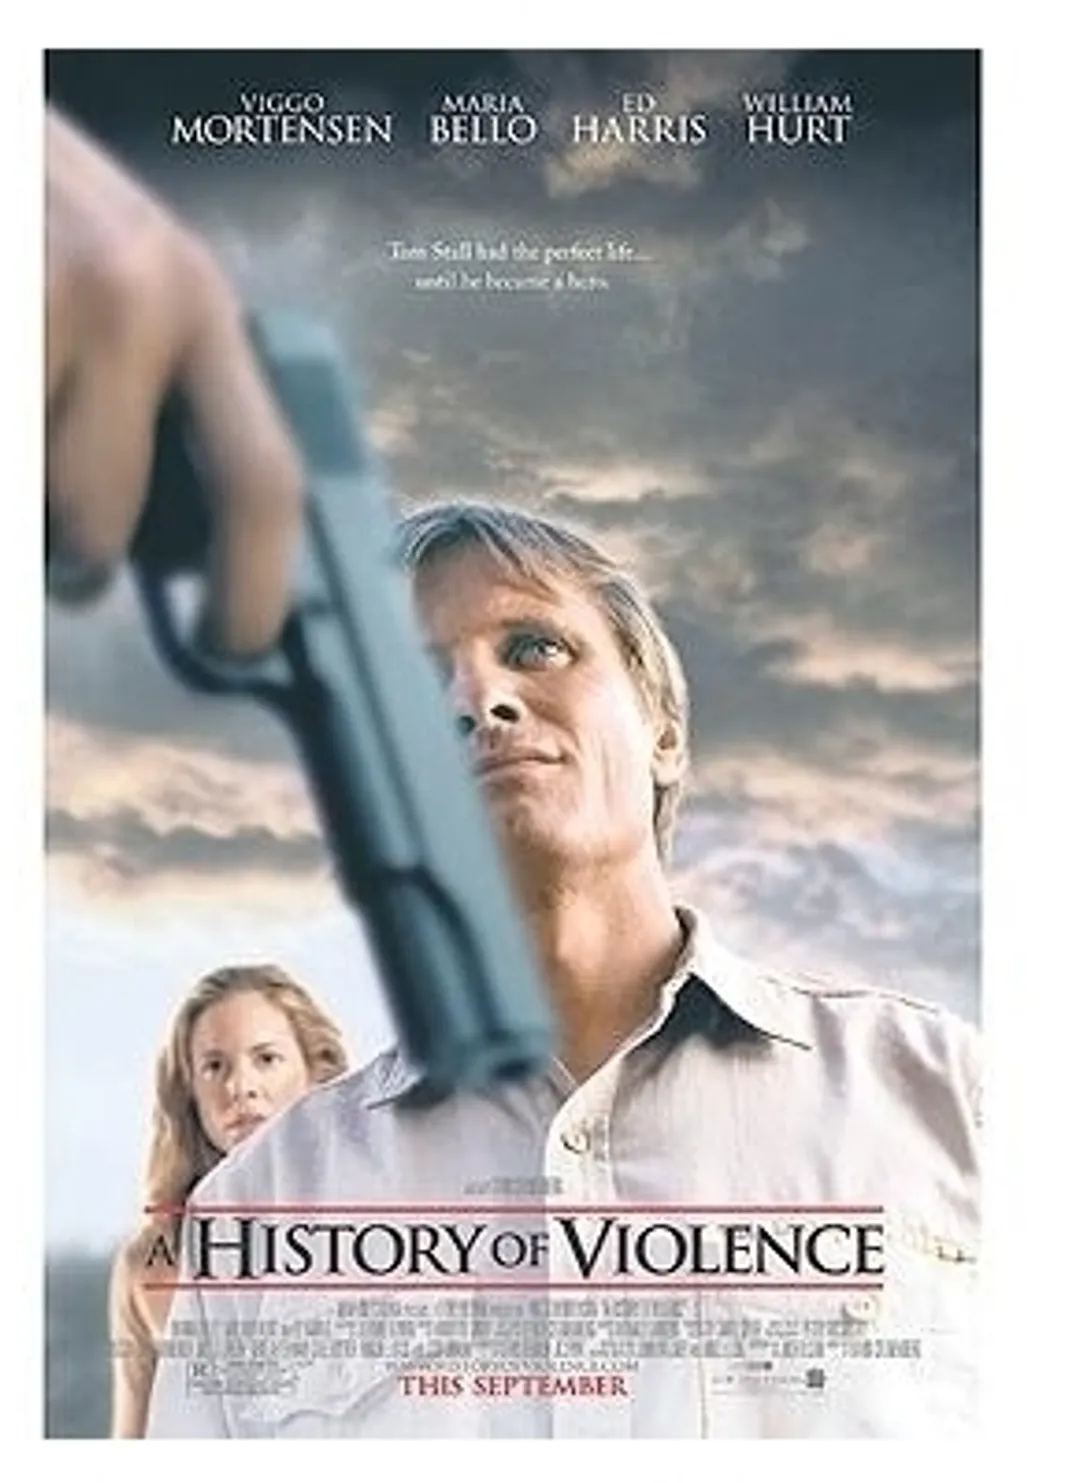 a-history-of-violence-movie-poster_2445476-288x400.jpeg